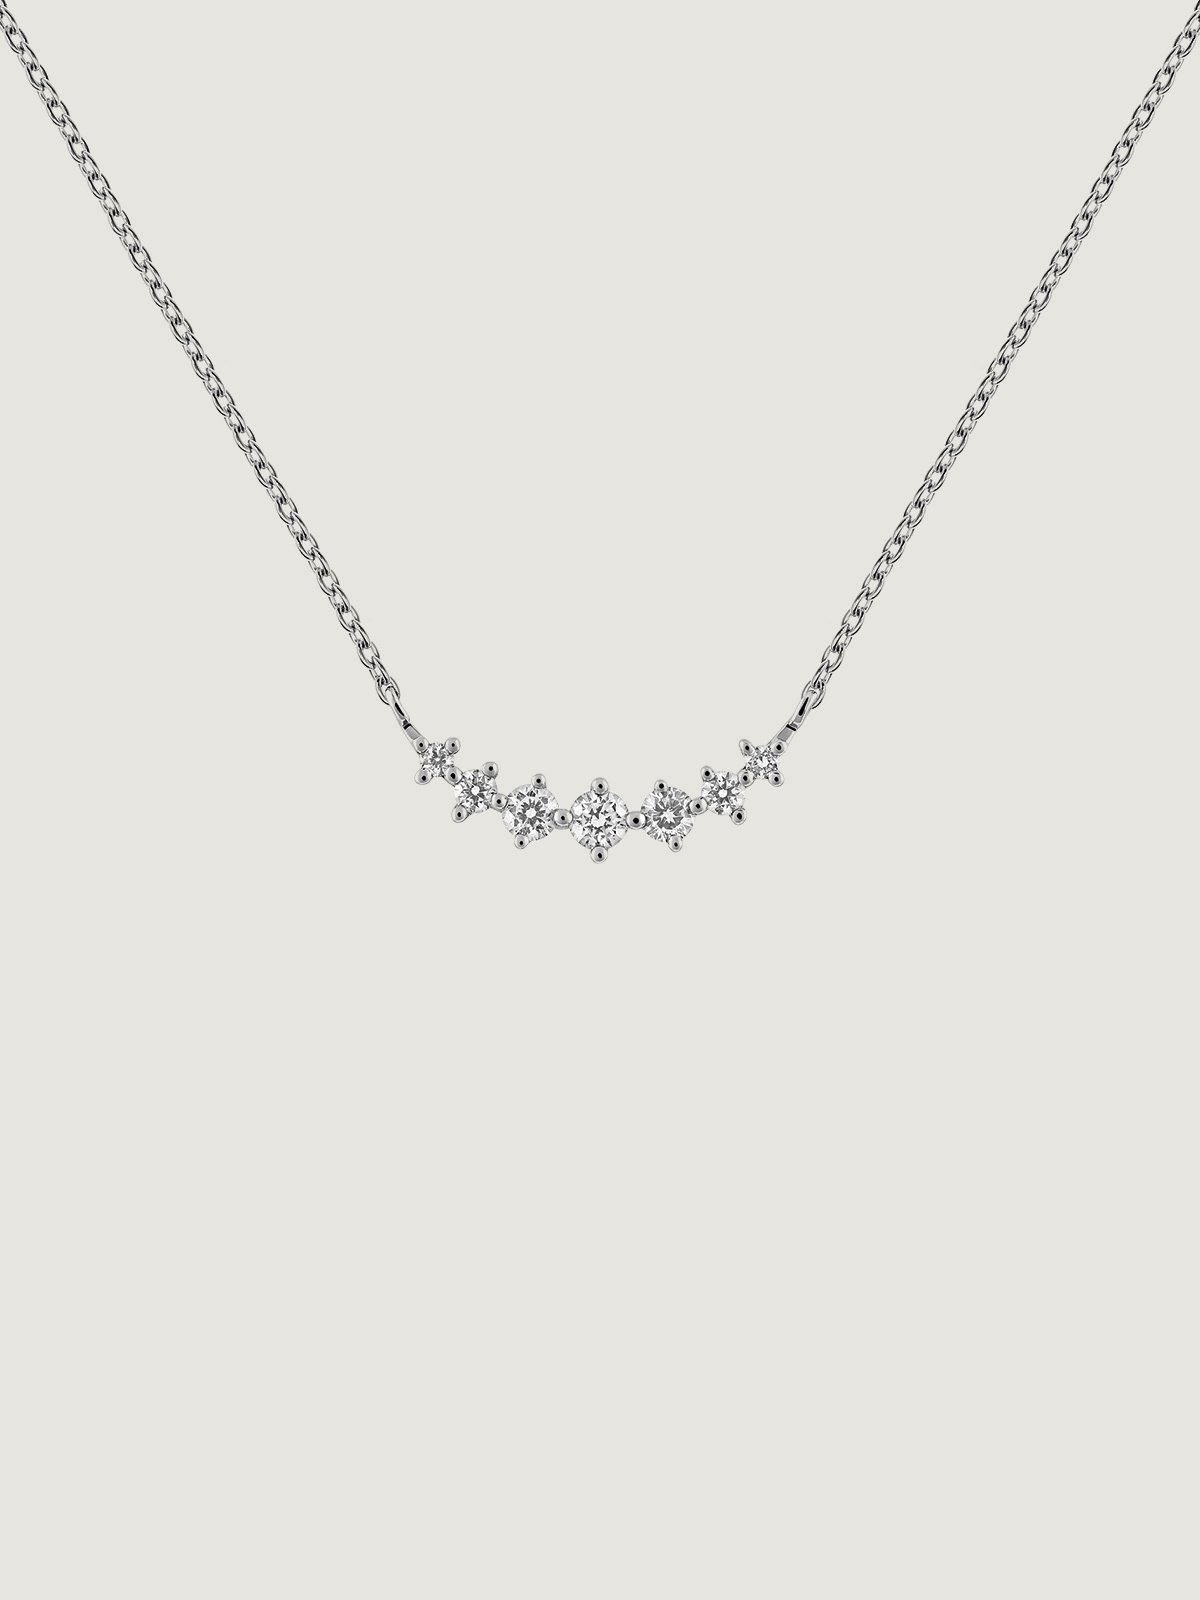 18K white gold necklace with diamonds